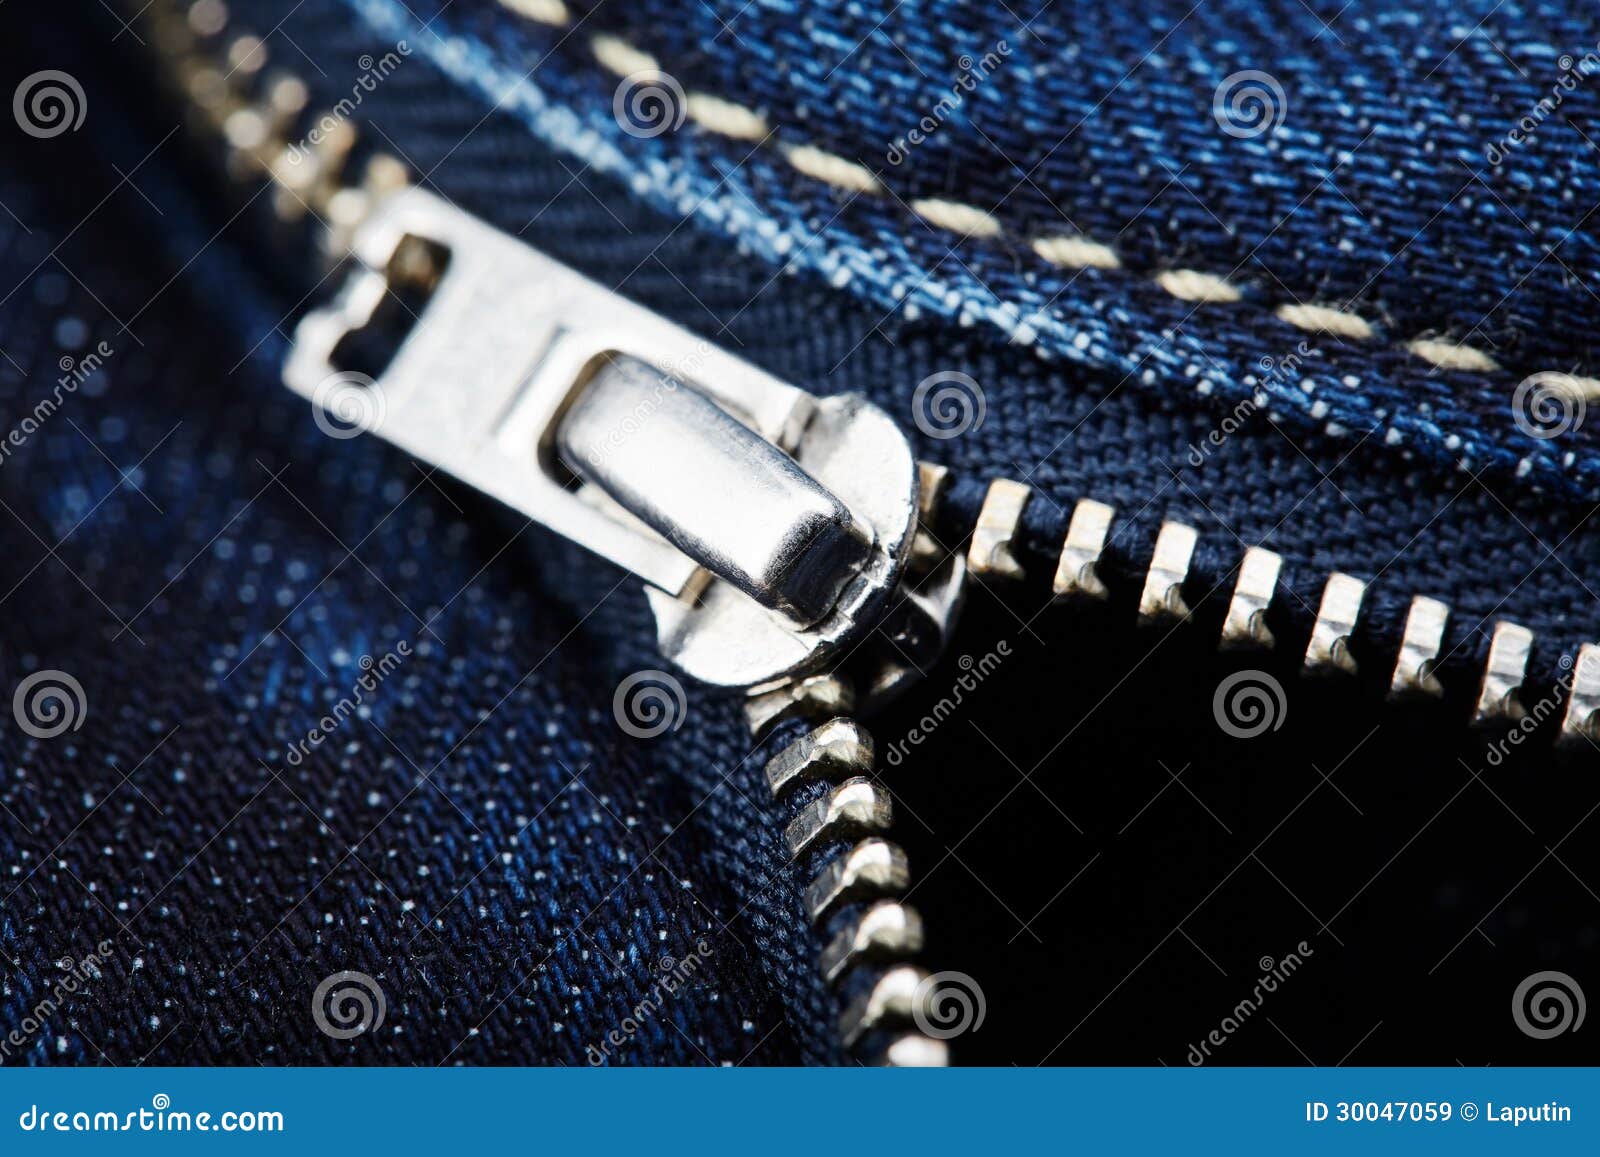 Blue jeans with zipper stock image. Image of fashion - 30047059